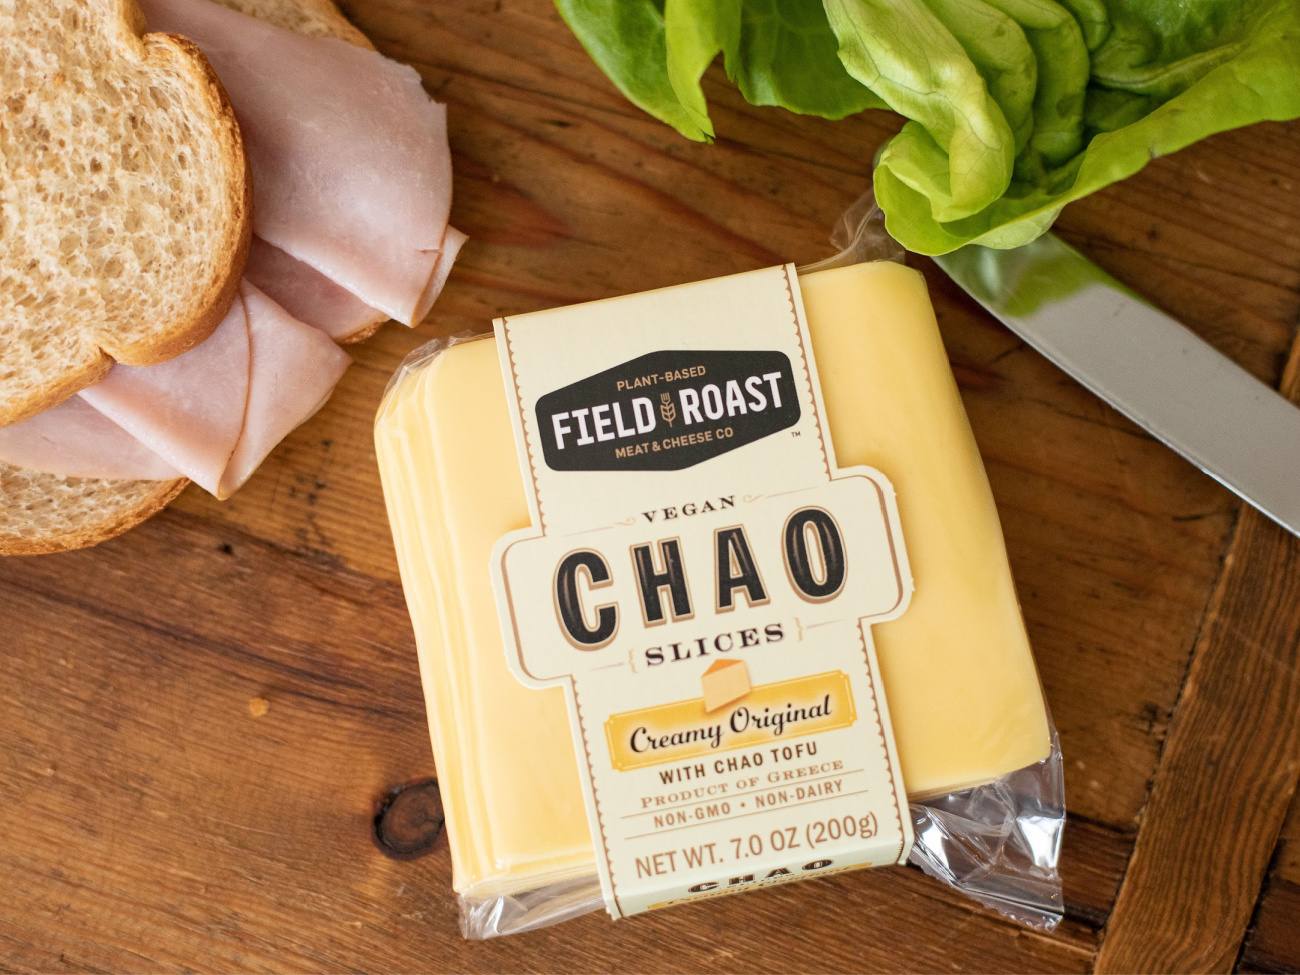 Field Roast Chao Plant-Based Cheese Slices Just $2.99 At Publix (Regular Price $5.49)